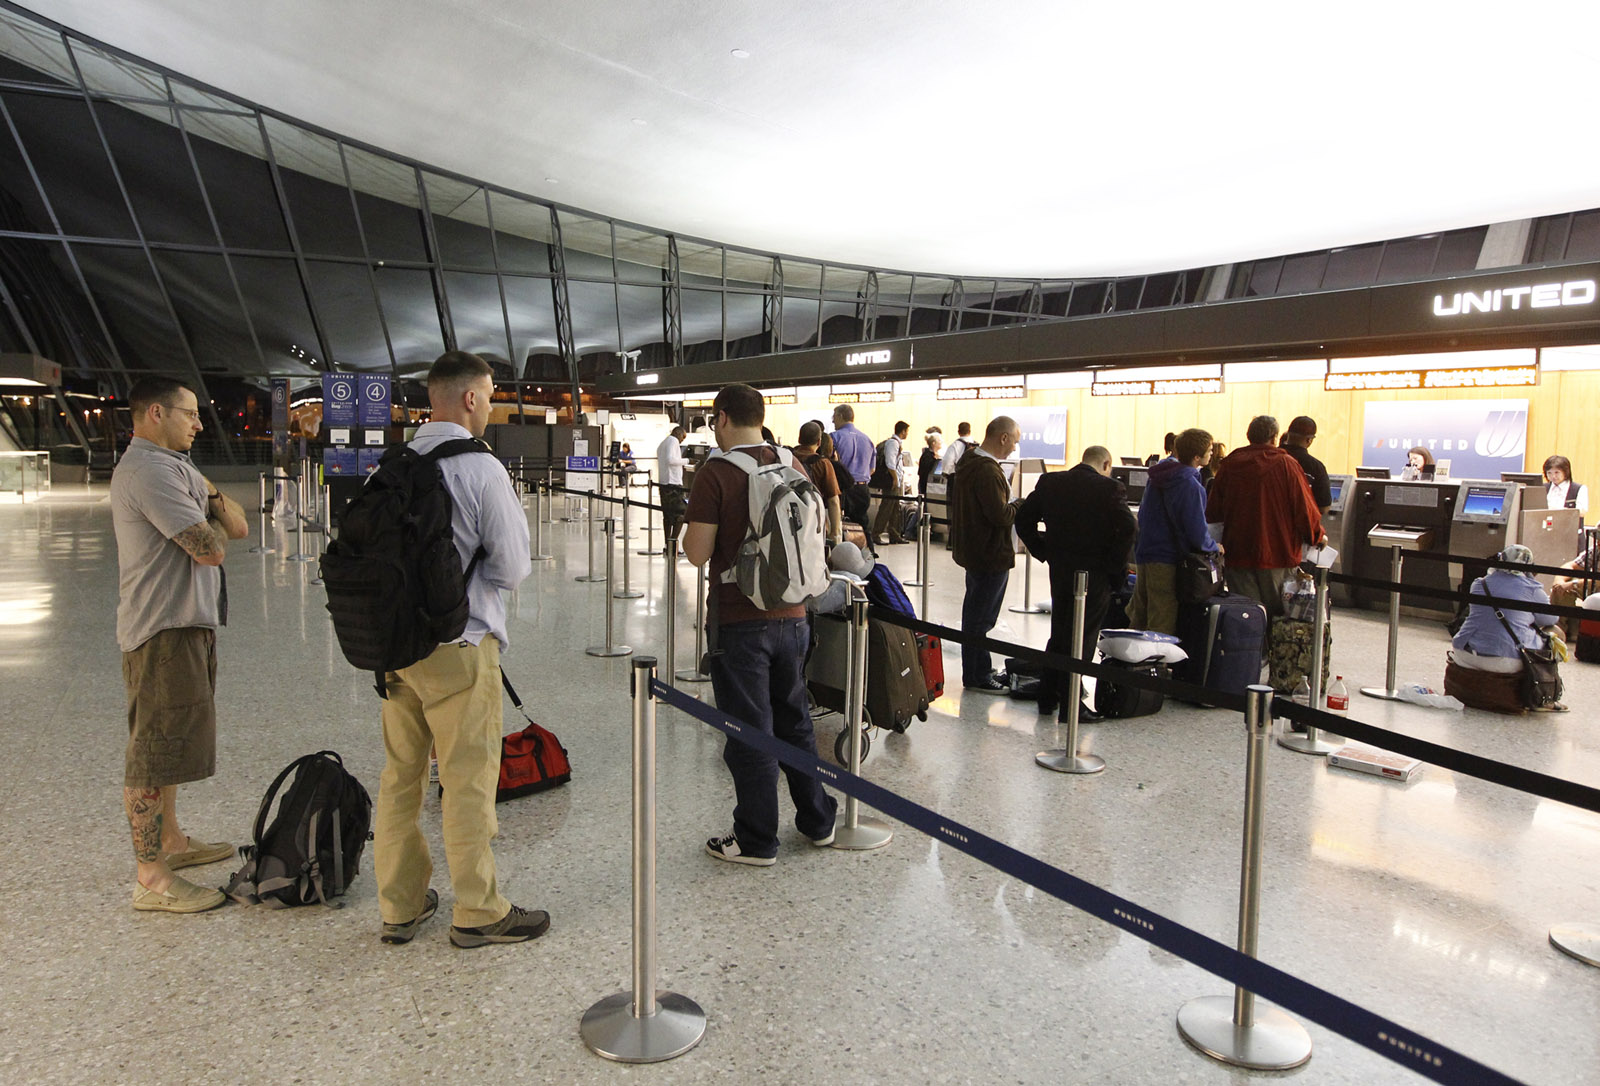 United Airlines passengers wait at the ticket counter of Washington Dulles International Airport in Chantilly, Va., Saturday, June 18, 2011. United Airlines computers crashed at at about 8:15 p.m. EDT interrupting departures and reservations and disrupting the airline's websites. (AP Photo/Luis M. Alvarez)